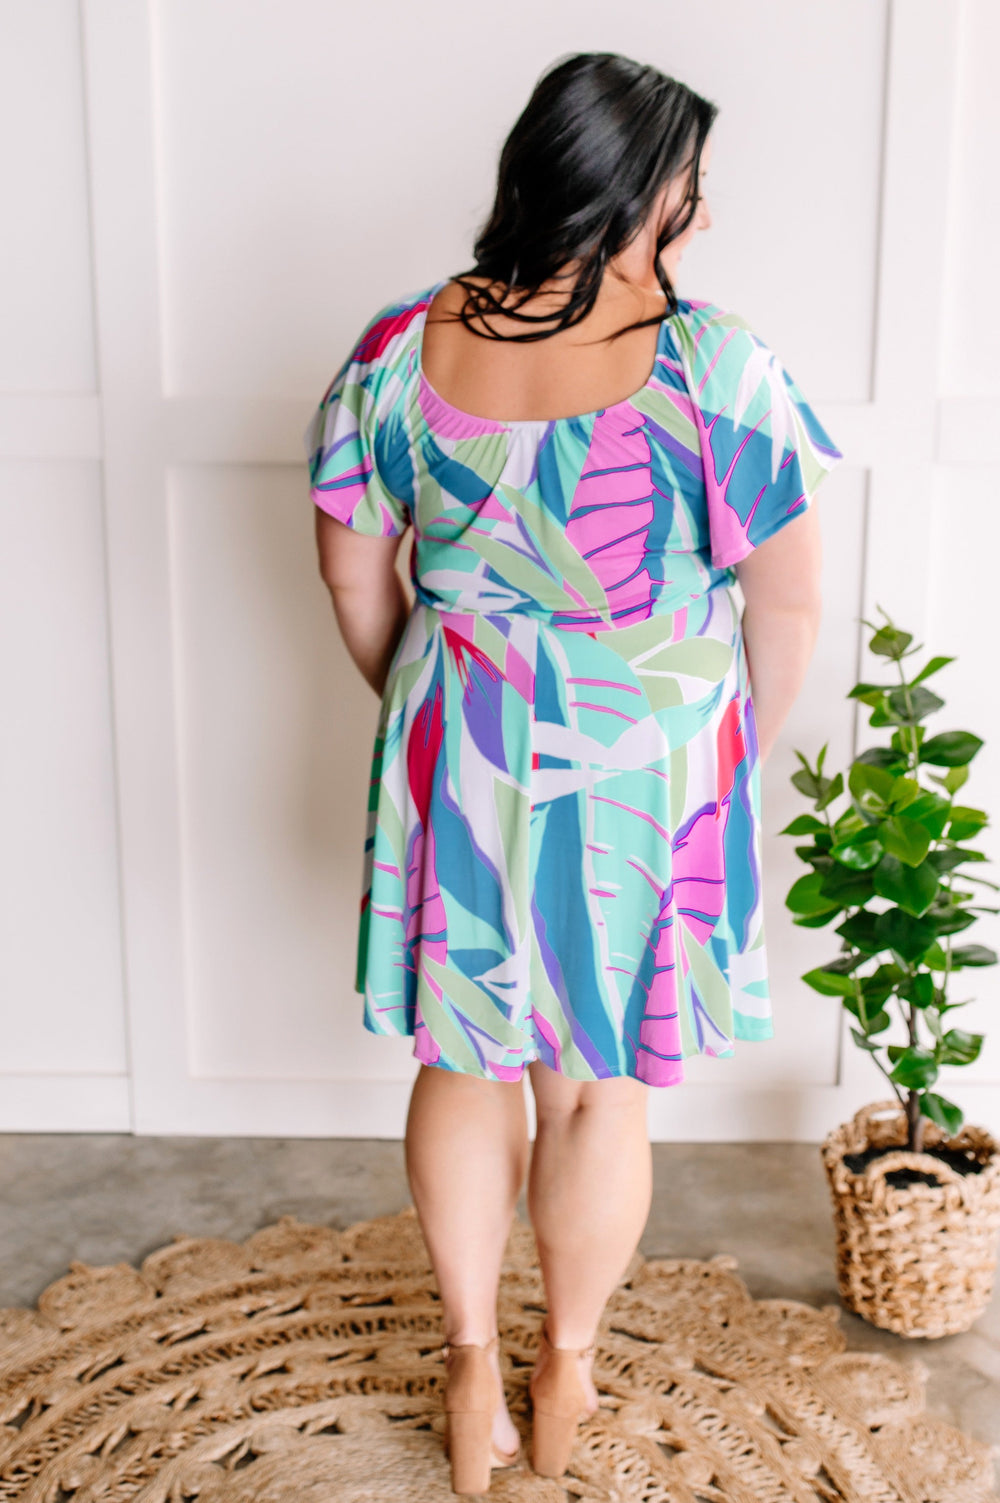 Vibrant Abstract Print Stretchy Dress with Attached Shorts - Flattering and Incredibly Soft